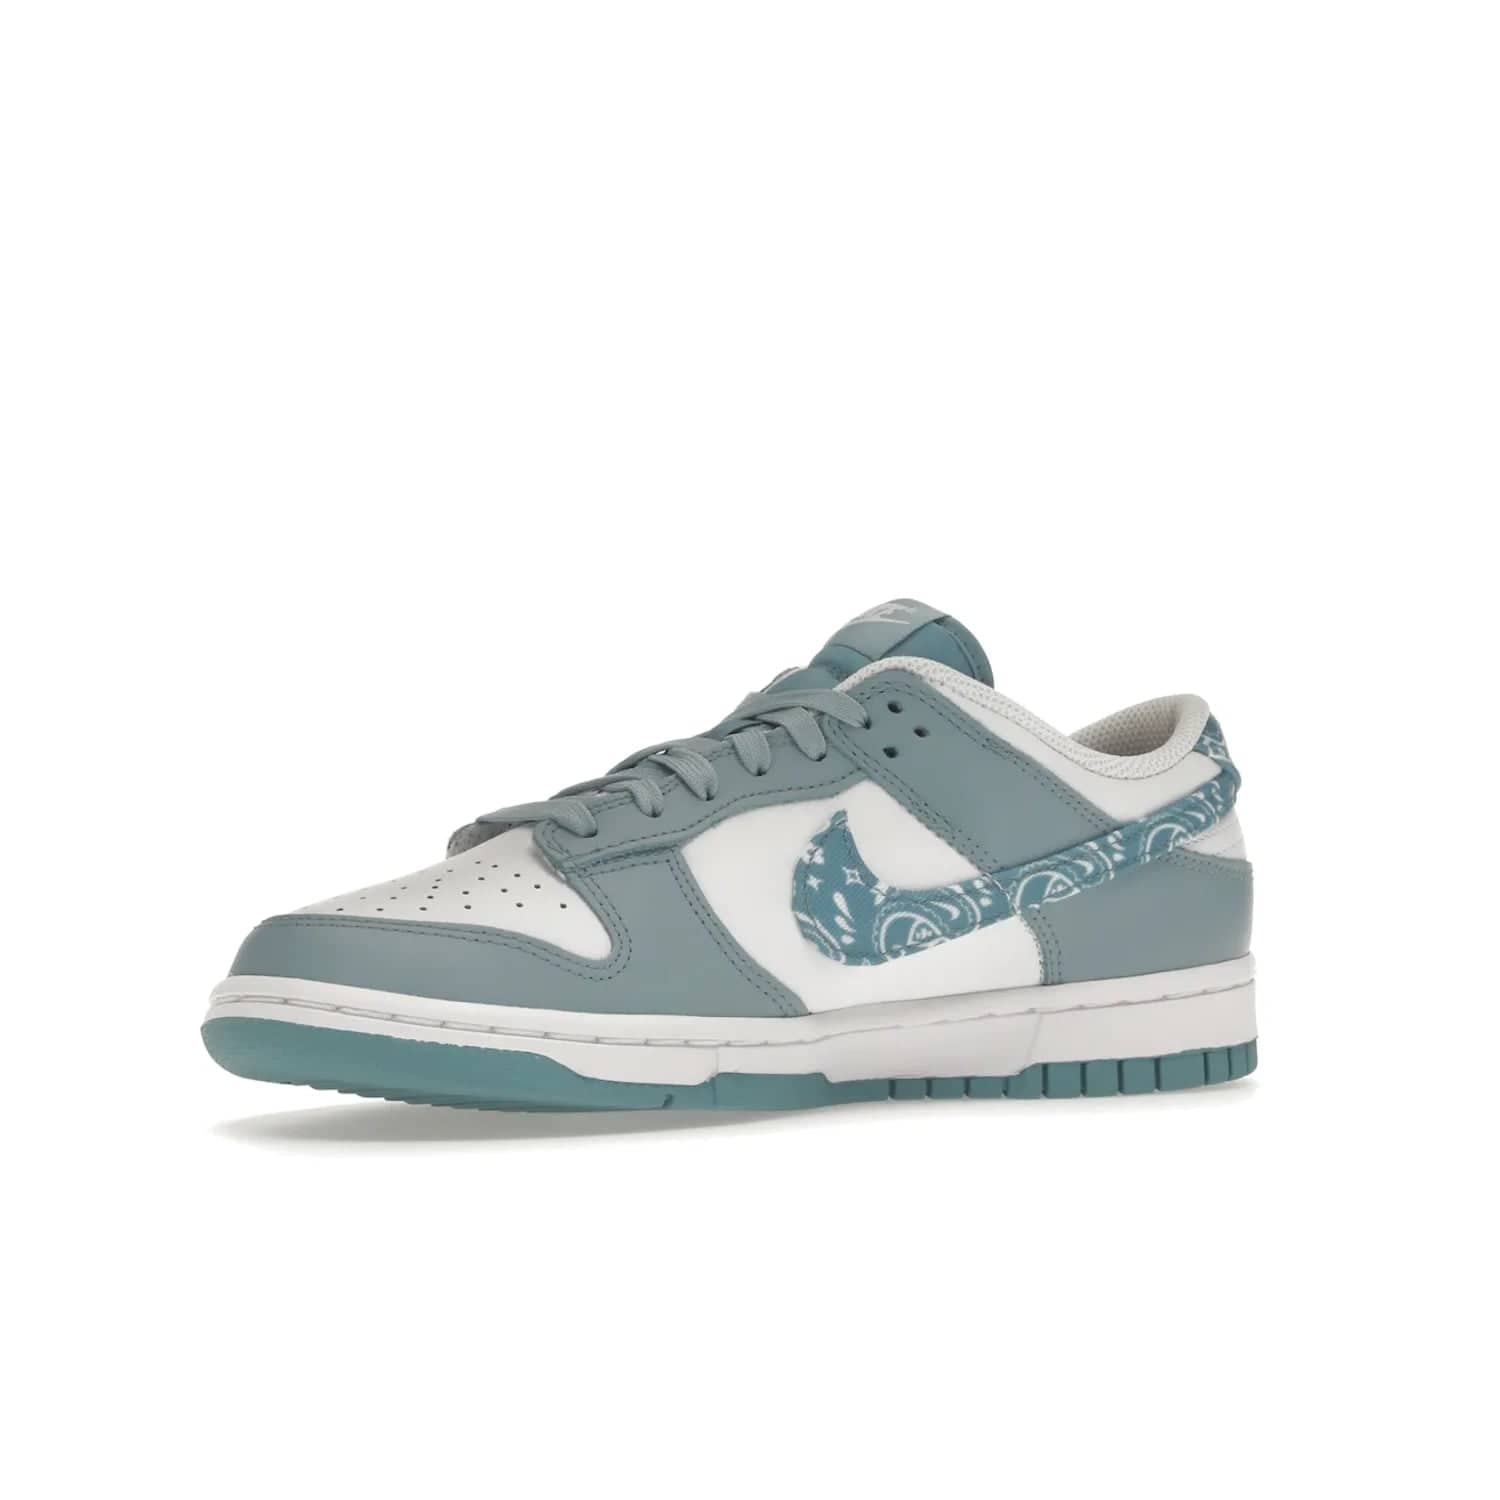 Nike Dunk Low Essential Paisley Pack Worn Blue (Women's) - Image 16 - Only at www.BallersClubKickz.com - Get the Nike Dunk Low Essential Paisley Pack Worn Blue (Women's) for style and comfort. White leather construction, light blue leather overlays, canvas Swooshes and matching heel tabs offer a rich blue hue. Finished by a white and light blue sole, this classic Nike Dunk is the perfect addition to any wardrobe. Released in March 2022.